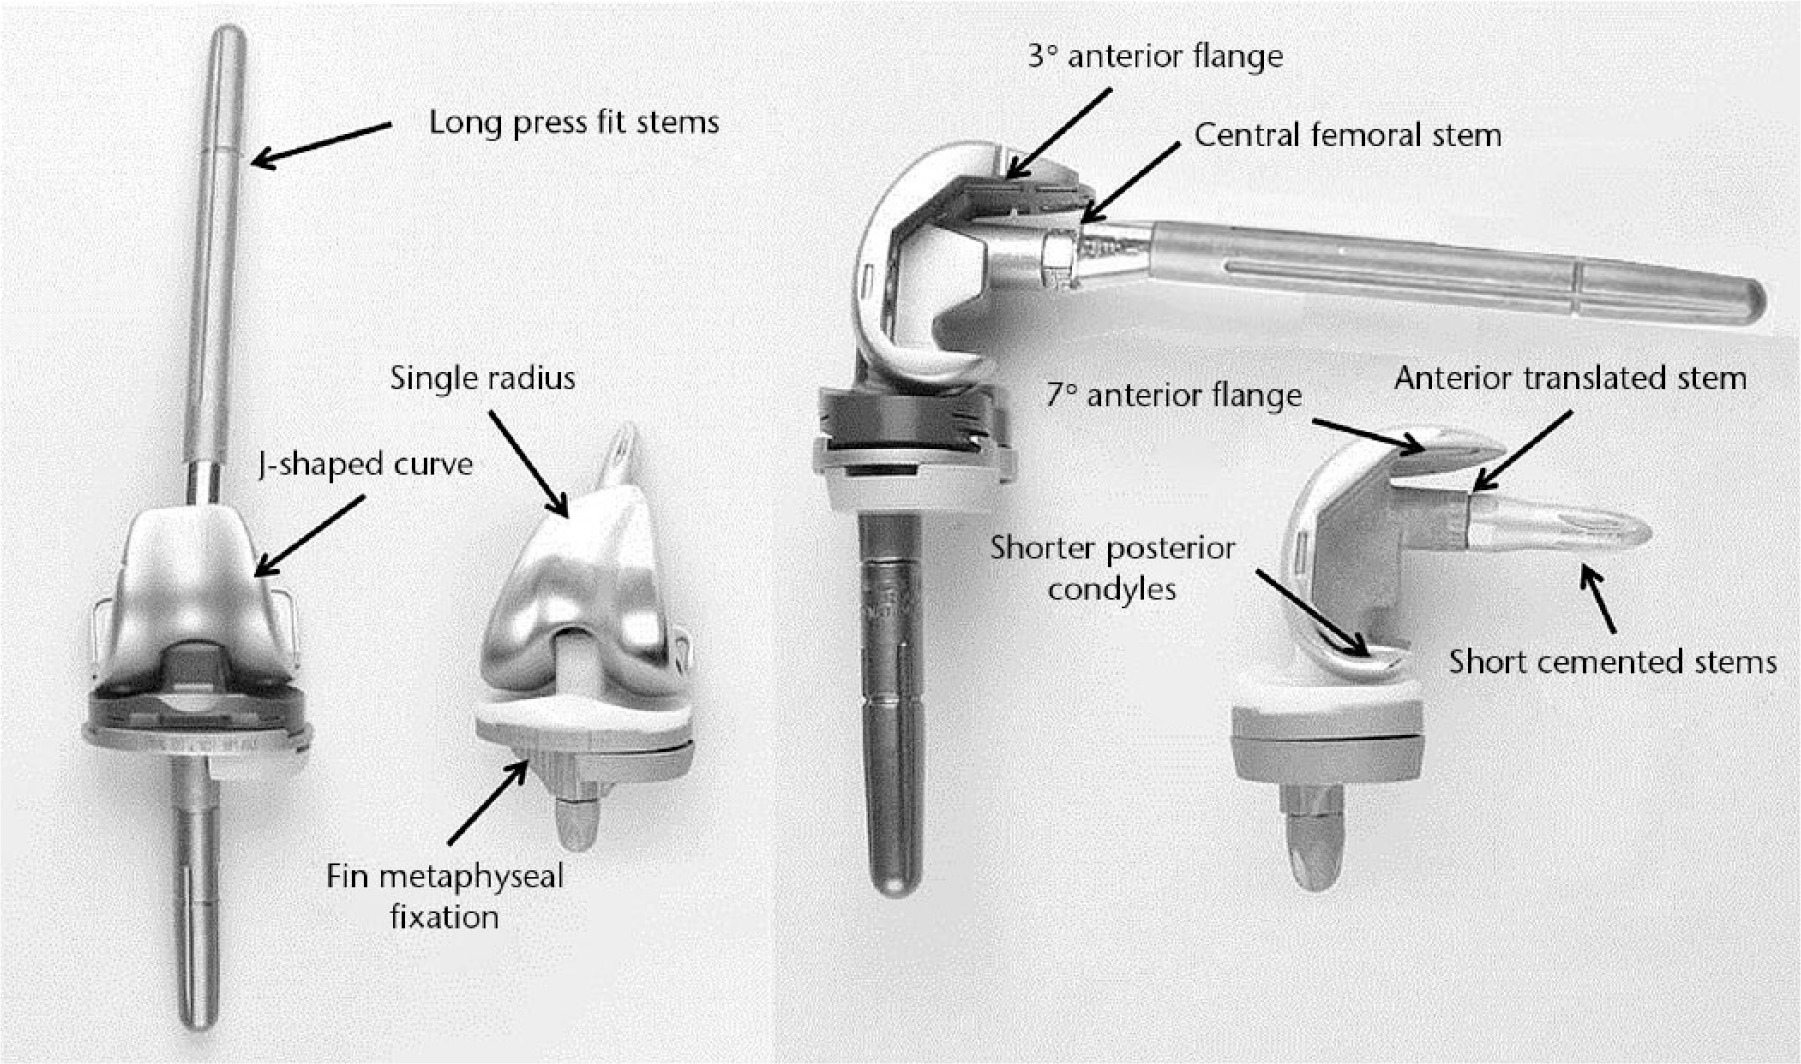 Fig. 1 
            Anterior and lateral views of the Kinemax TS (to the left) and Triathlon TS (to the right) revision TS TKA systems.
          